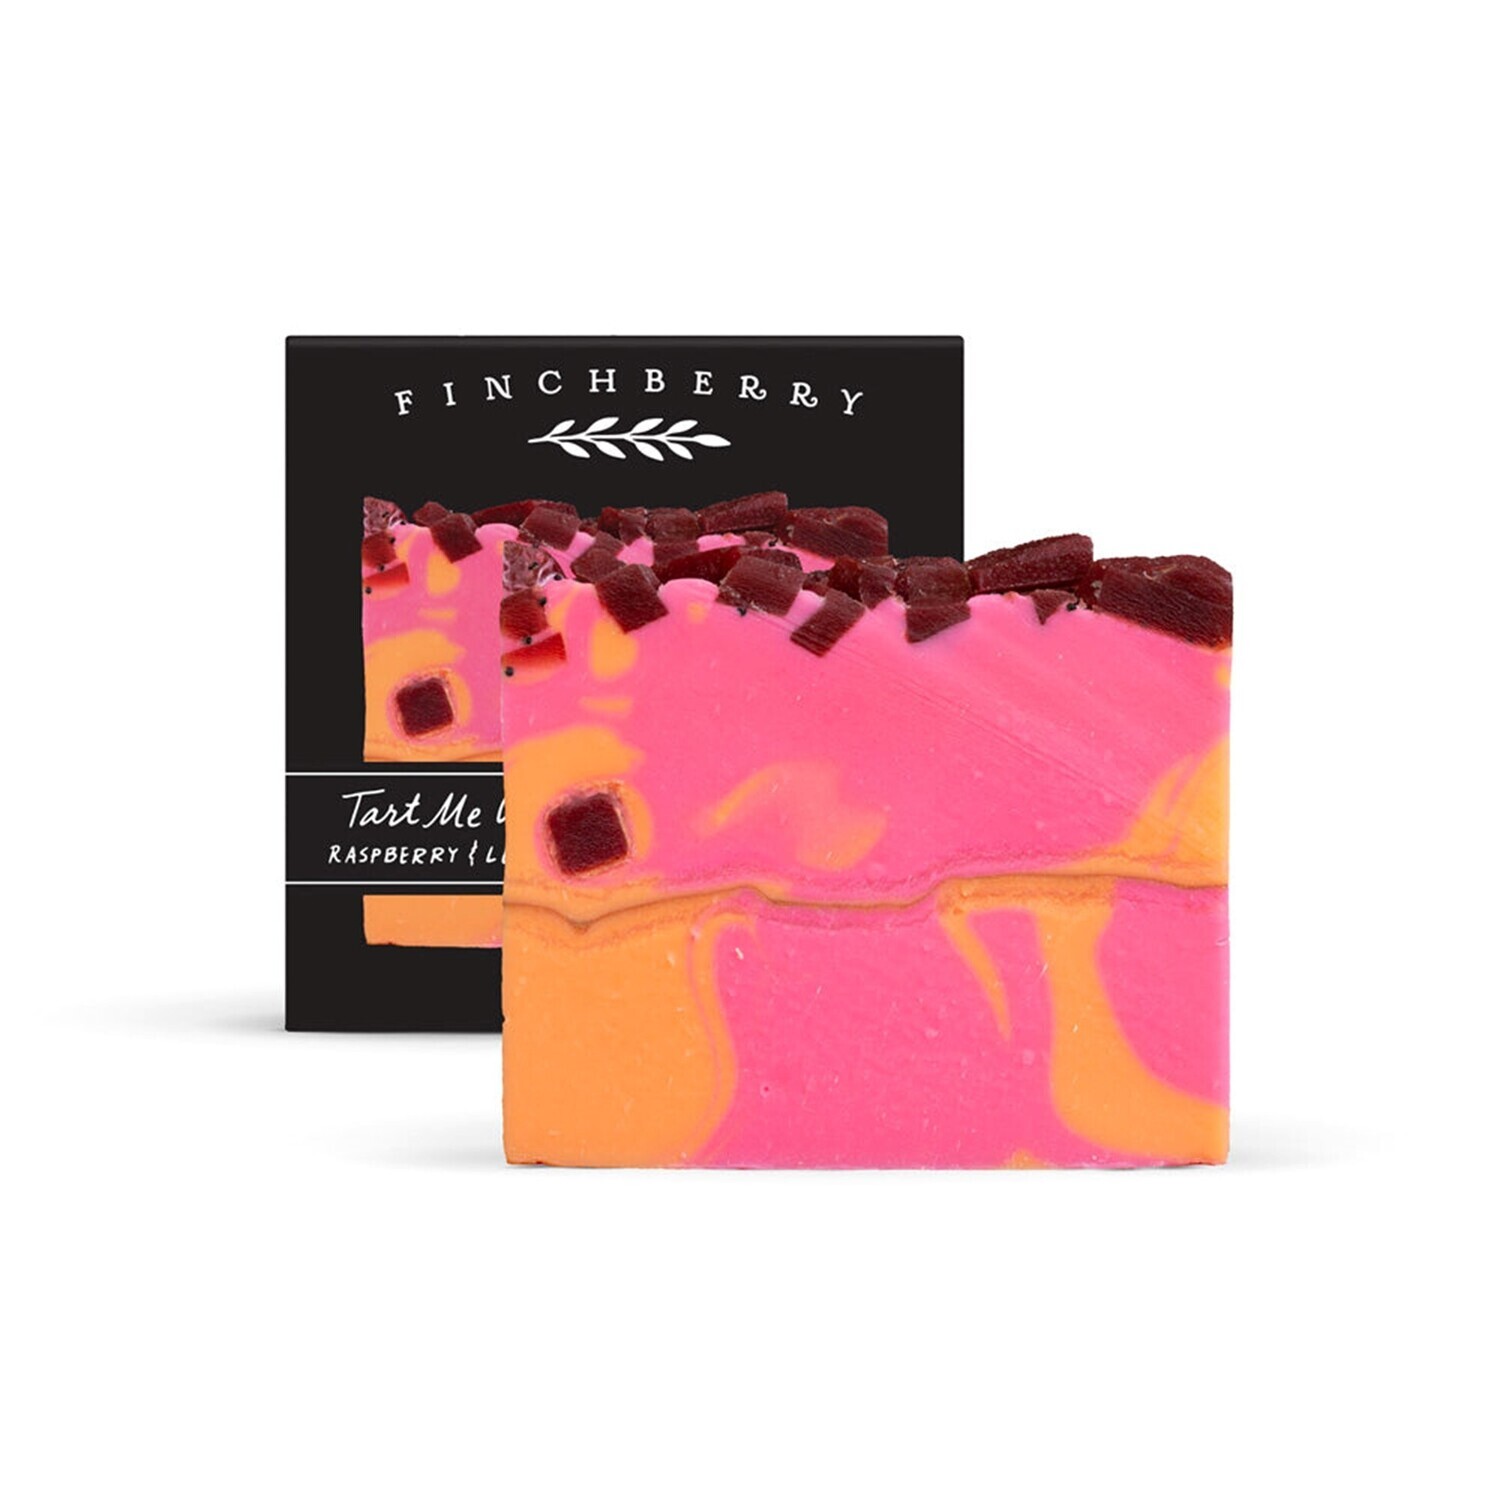 FinchBerry Tart Me Up Soap